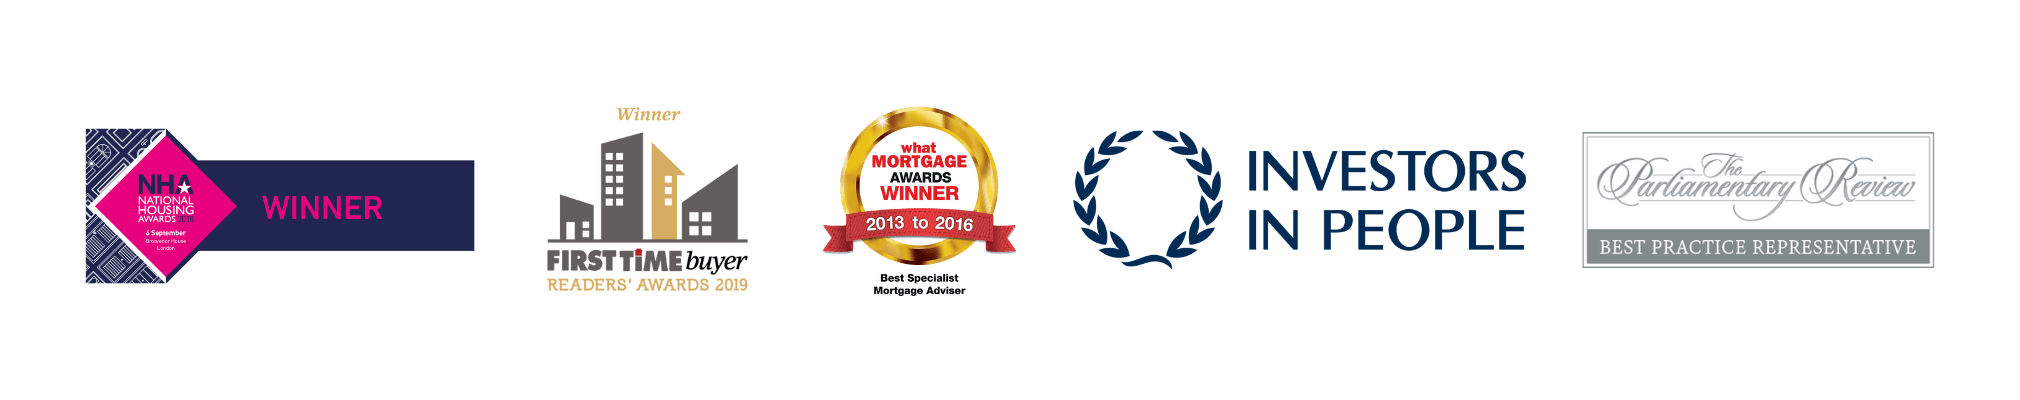 Find a mortgage with award-winning broker, Censeo Financial